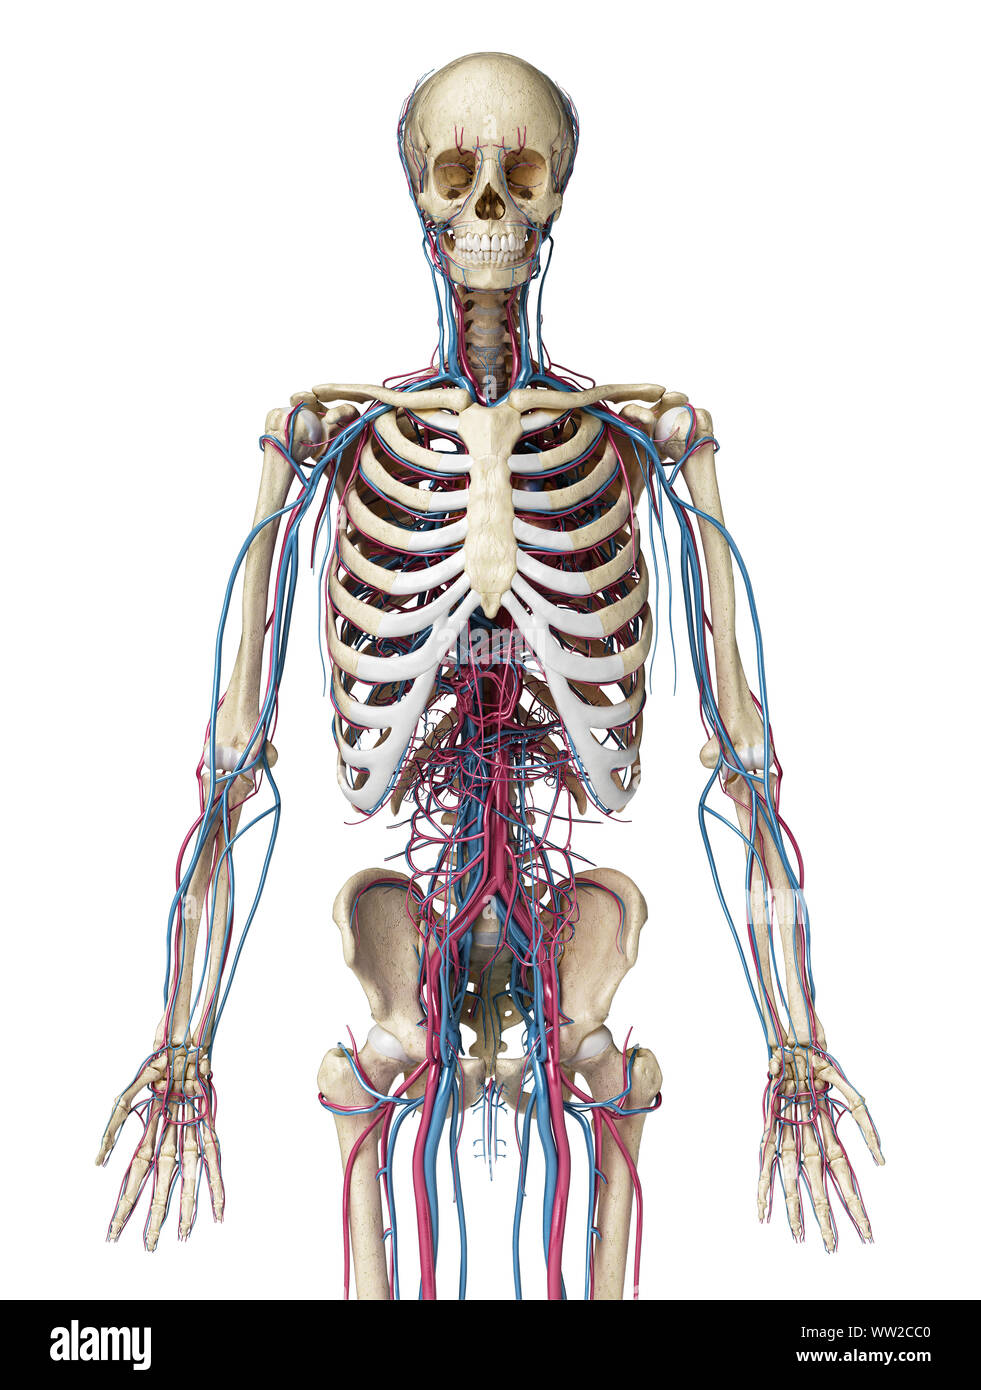 Human body anatomy. 3d illustration of 3/4 Skeletal and cardiovascular systems. Viewed from the front. On white background. Stock Photo